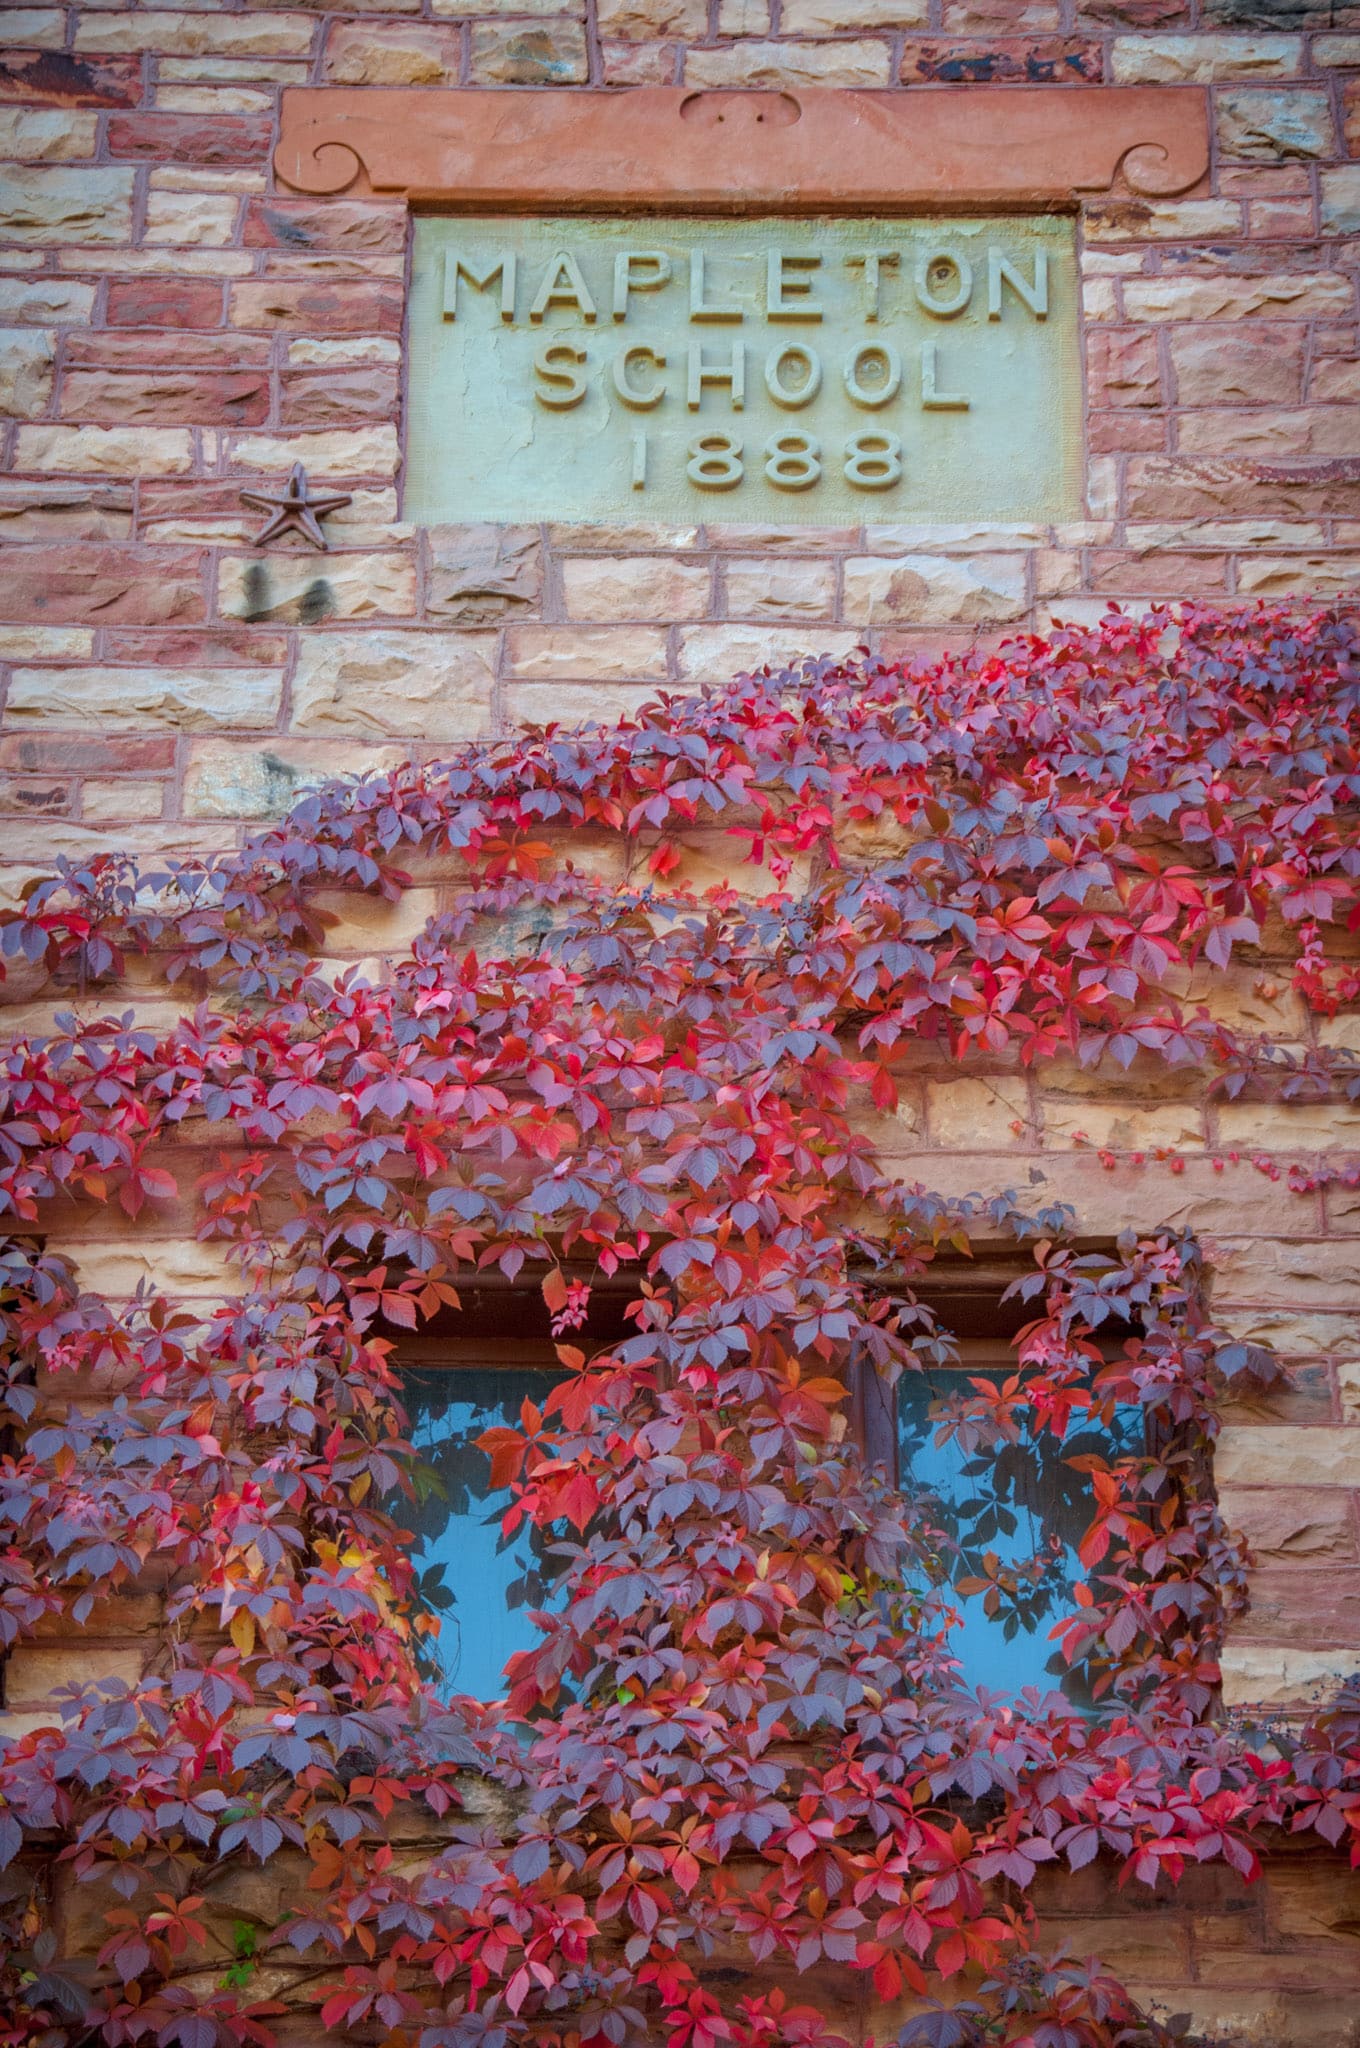 The Virginia Creeper turns red in the fall and adorns the red standstone wall of the Mapleton School in Boulder, Colorado.